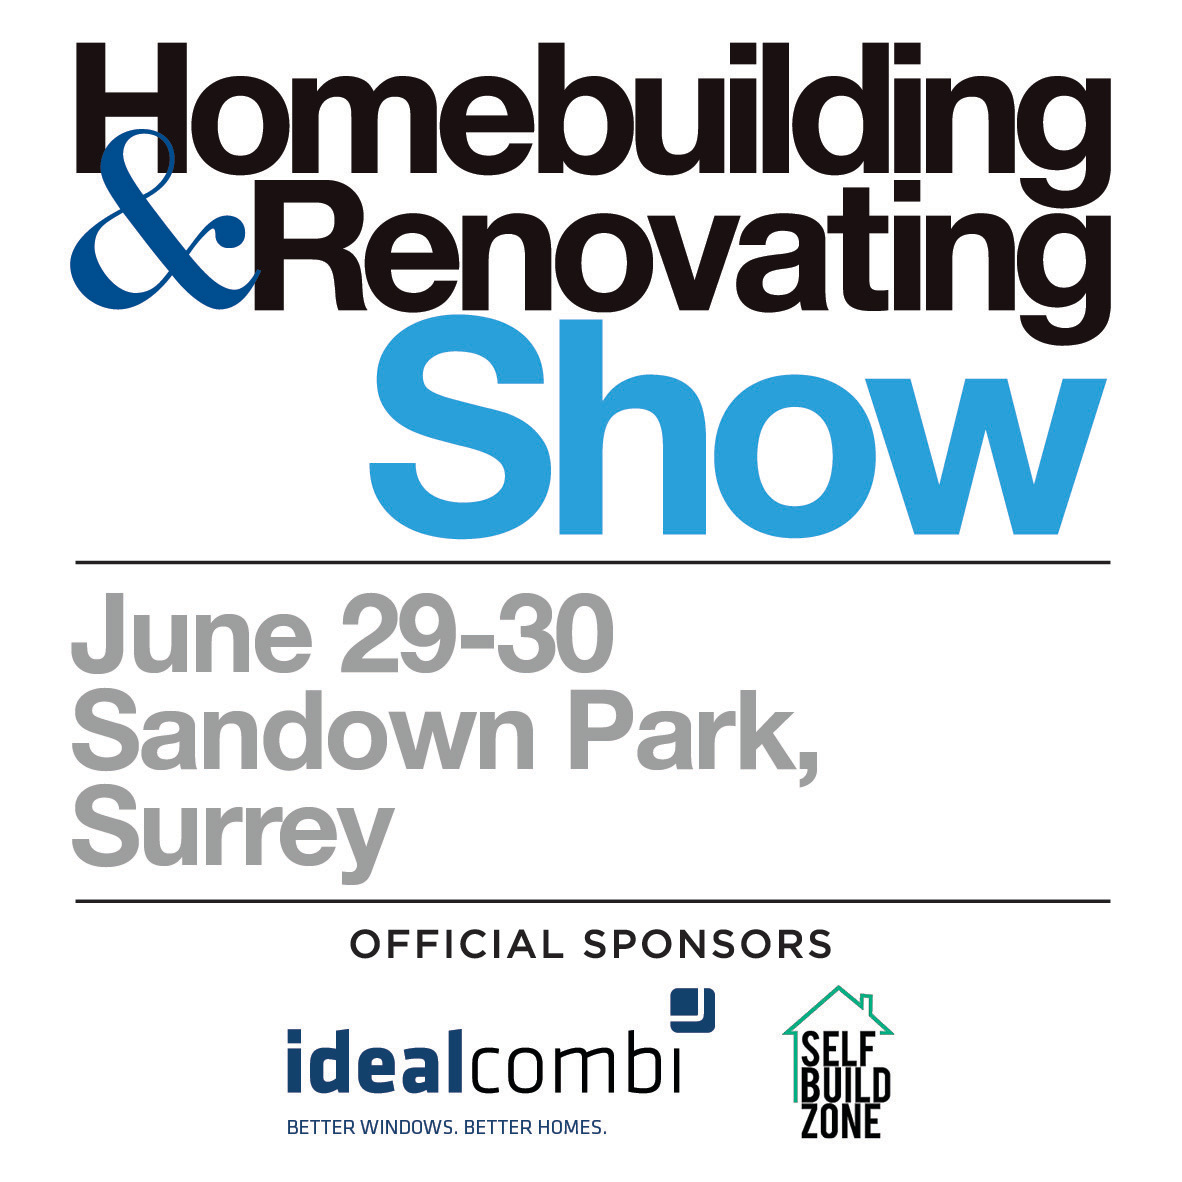 Find out how to add an extra level of enjoyment to your house at the Southern Homebuilding & Renovating Show @MyHomebuilding